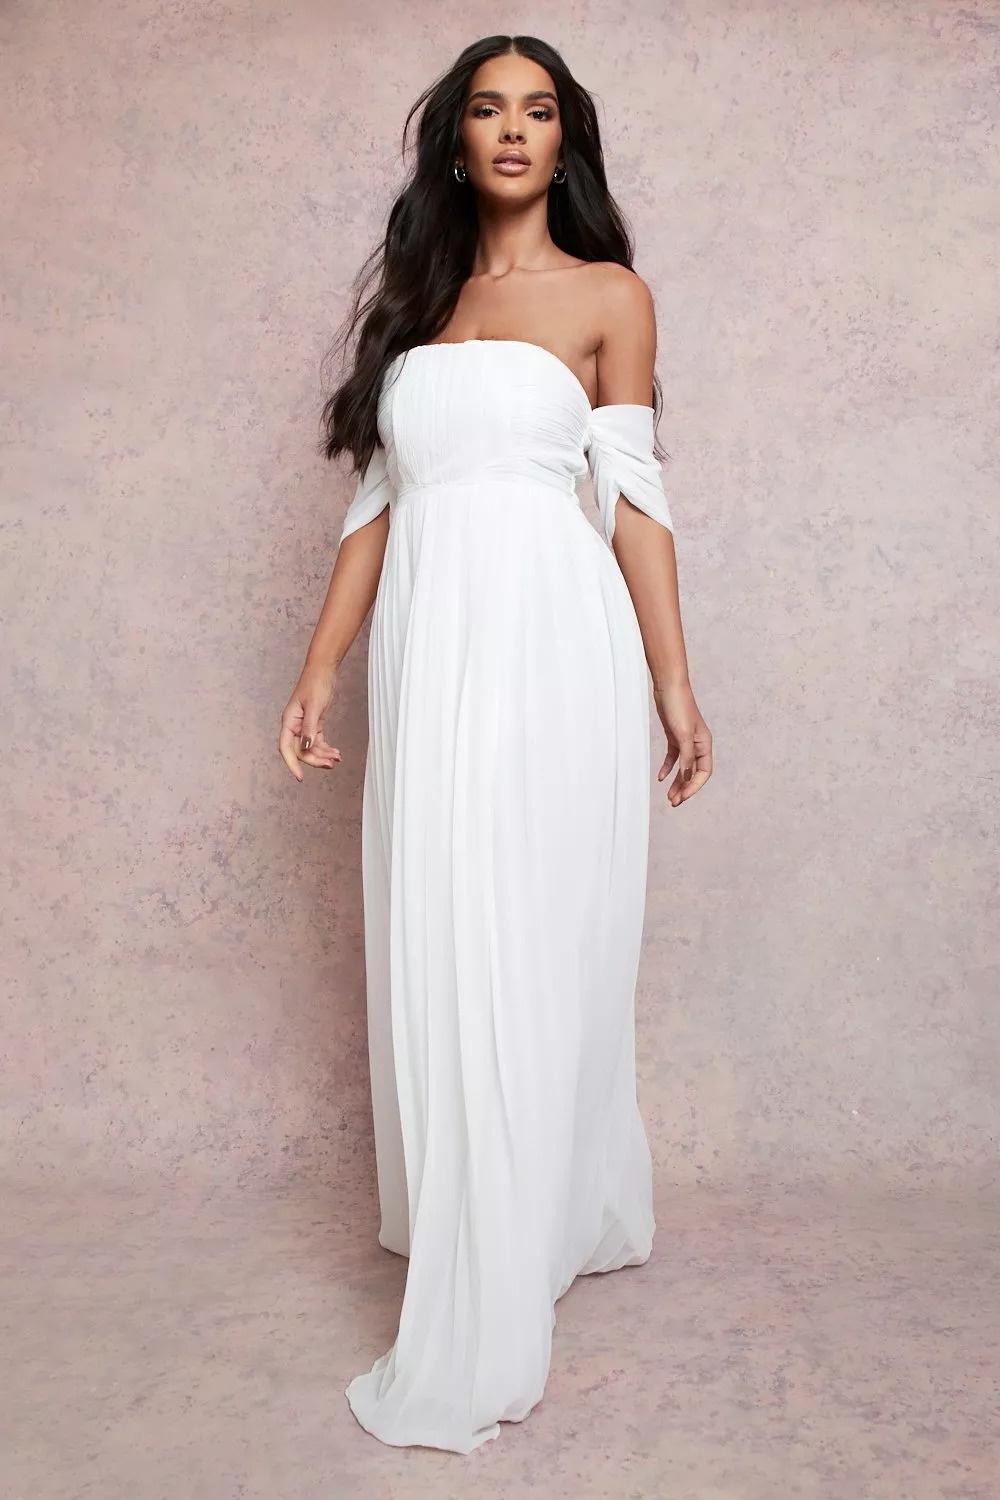 30 Best White Bridesmaid Dresses 2022 - hitched.co.uk - hitched.co.uk